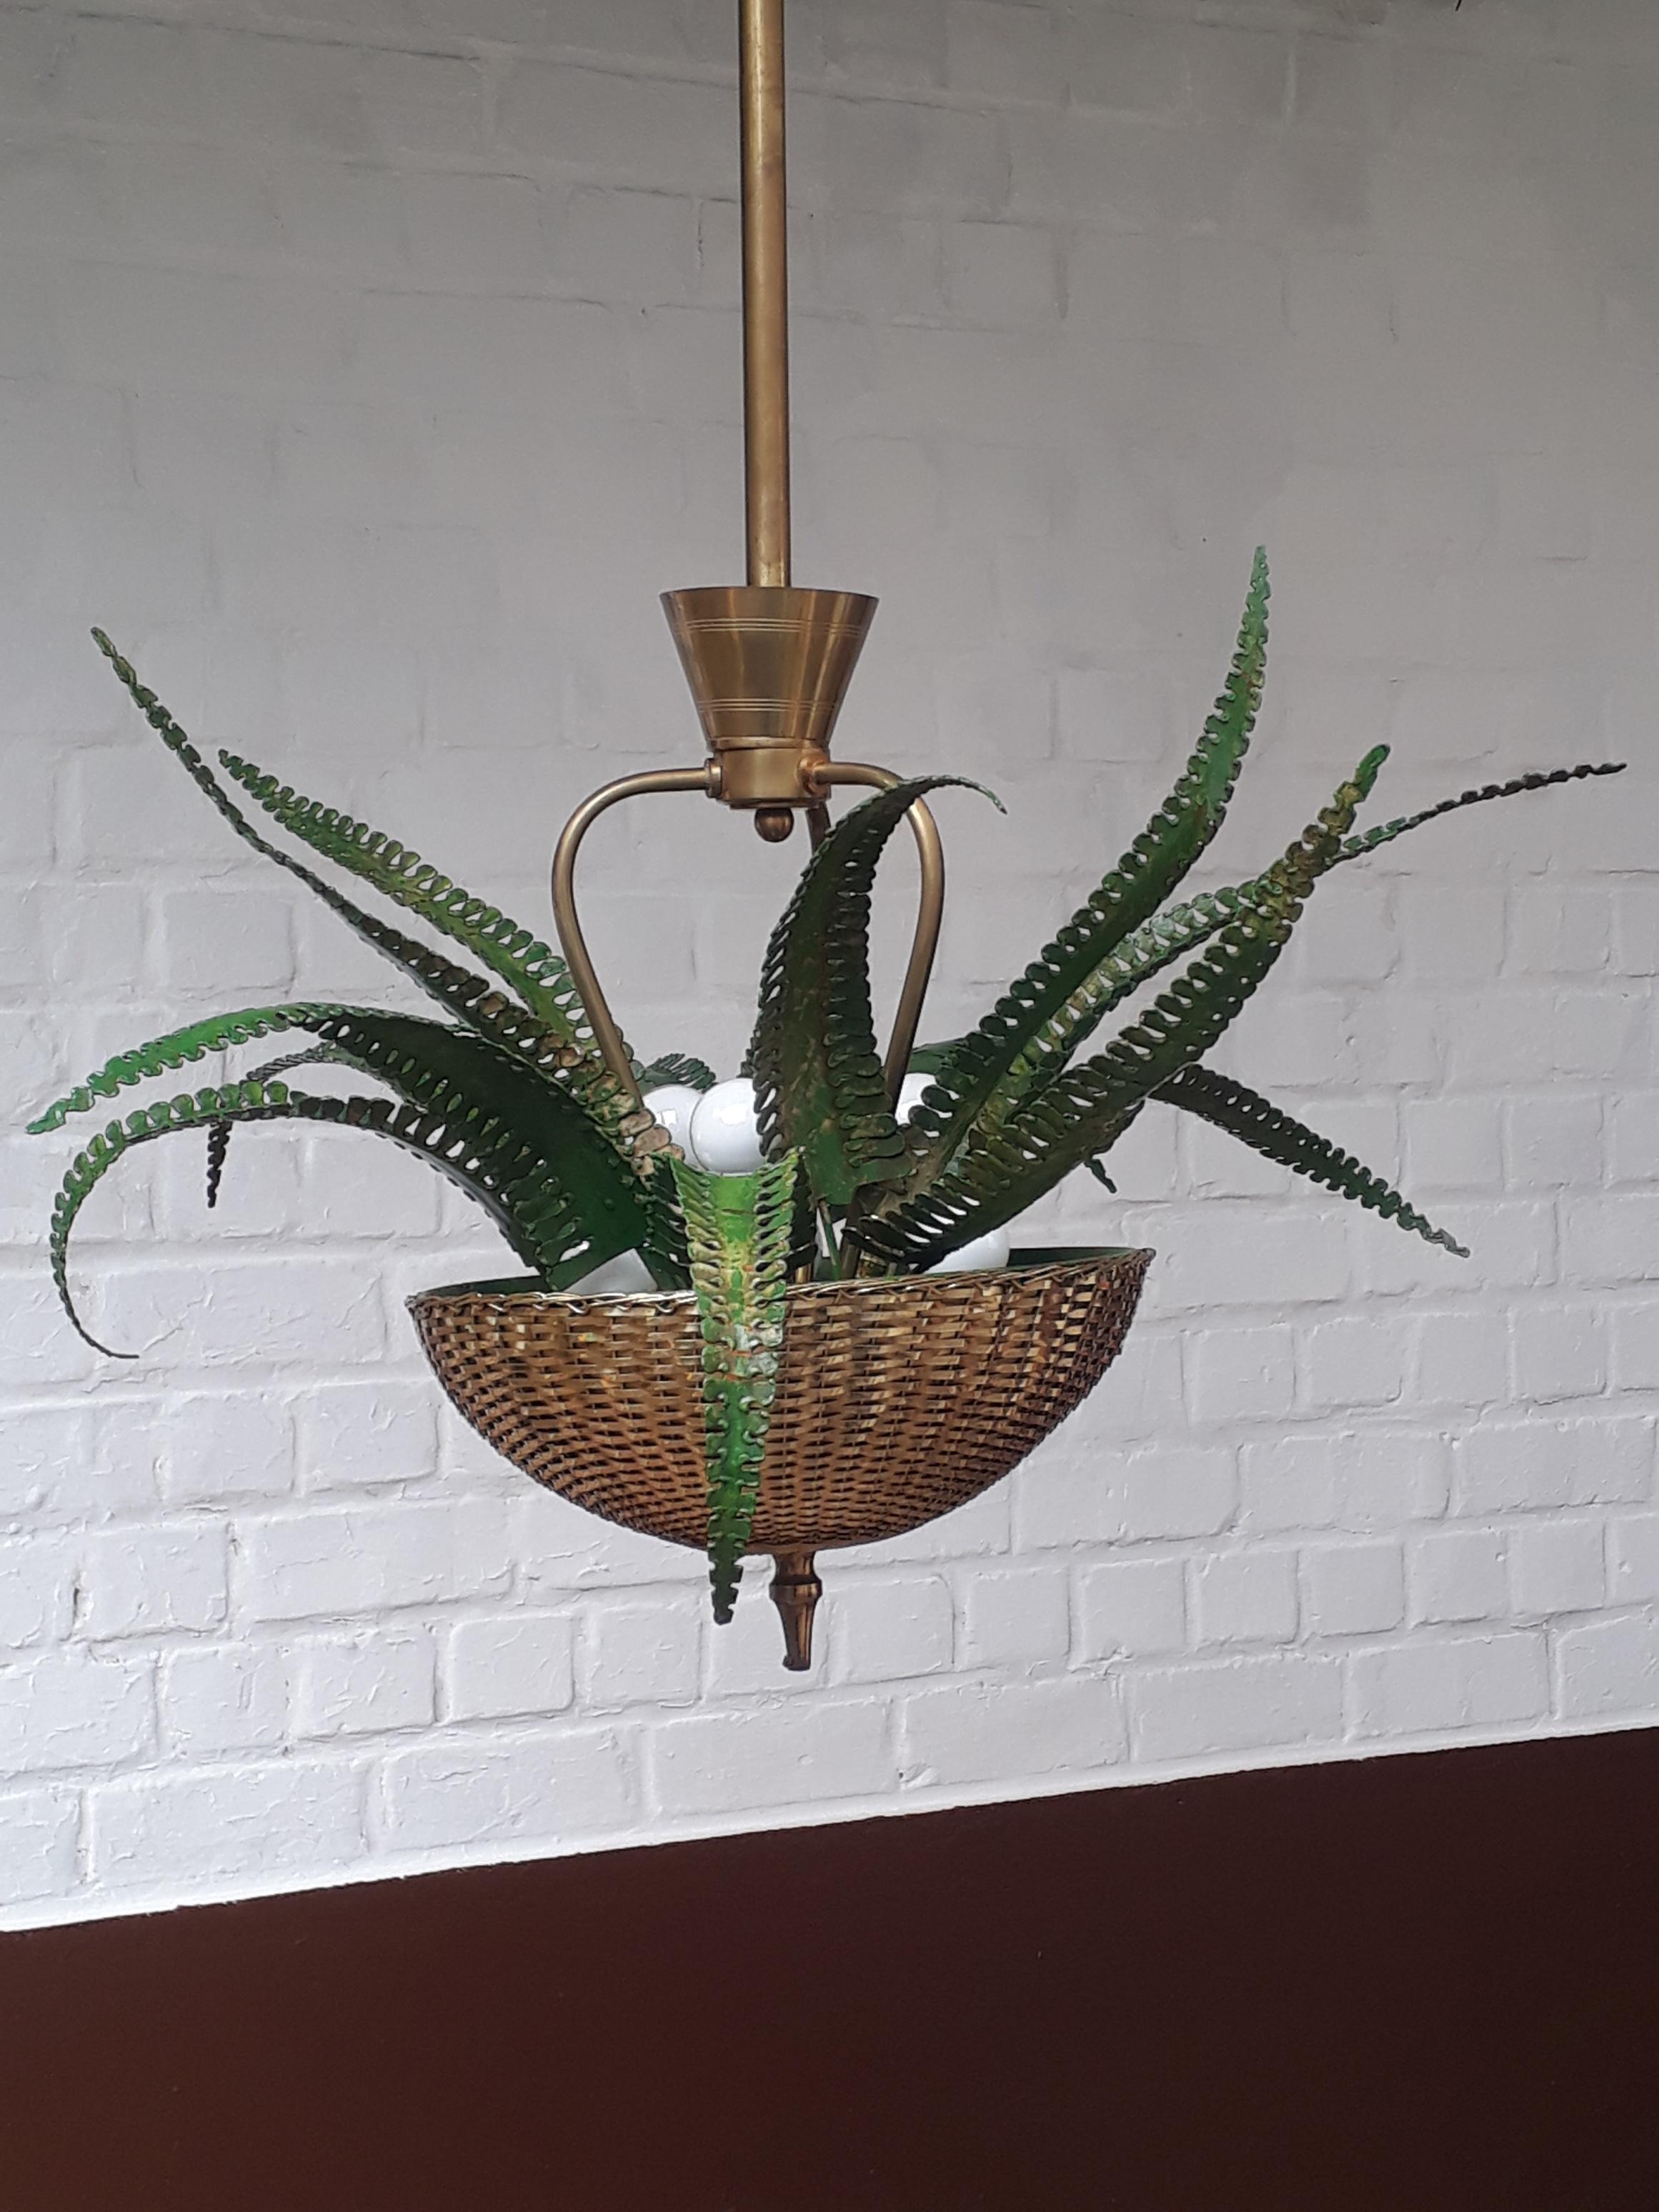 Dating from the mid-1950s, this eye-catching chandelier is quite unique with an organic fern type decor growing out of a woven brass filament basket. It has an interesting “living” type patina applied directly to the leaves.